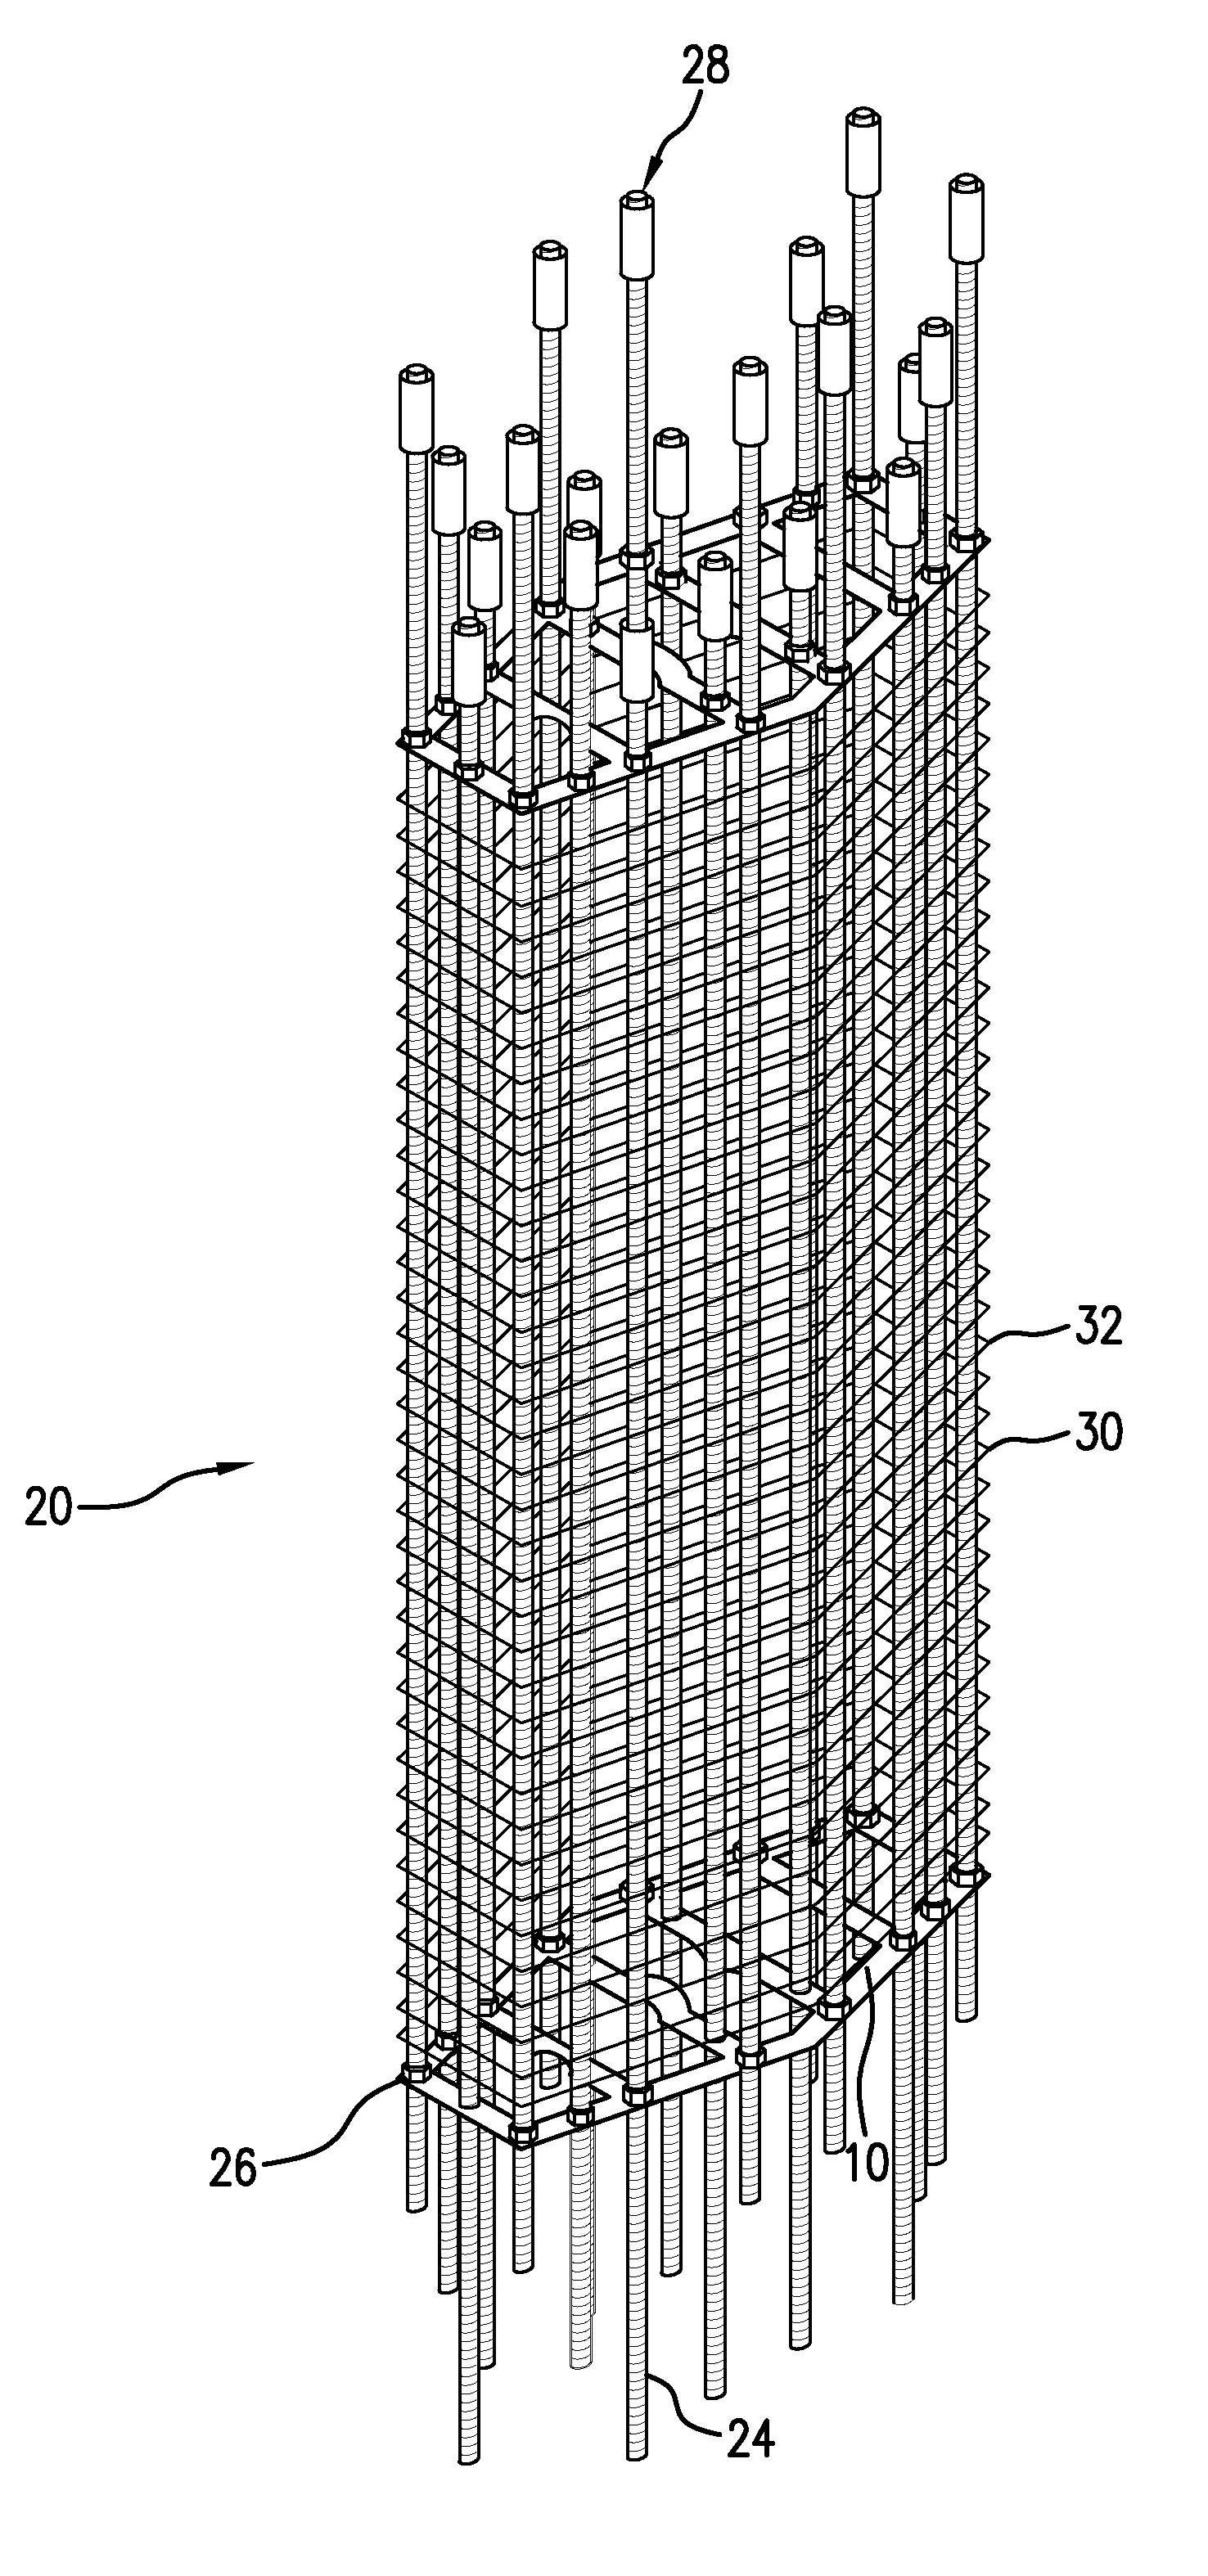 Pre-fabricated modular reinforcement cages for concrete structures